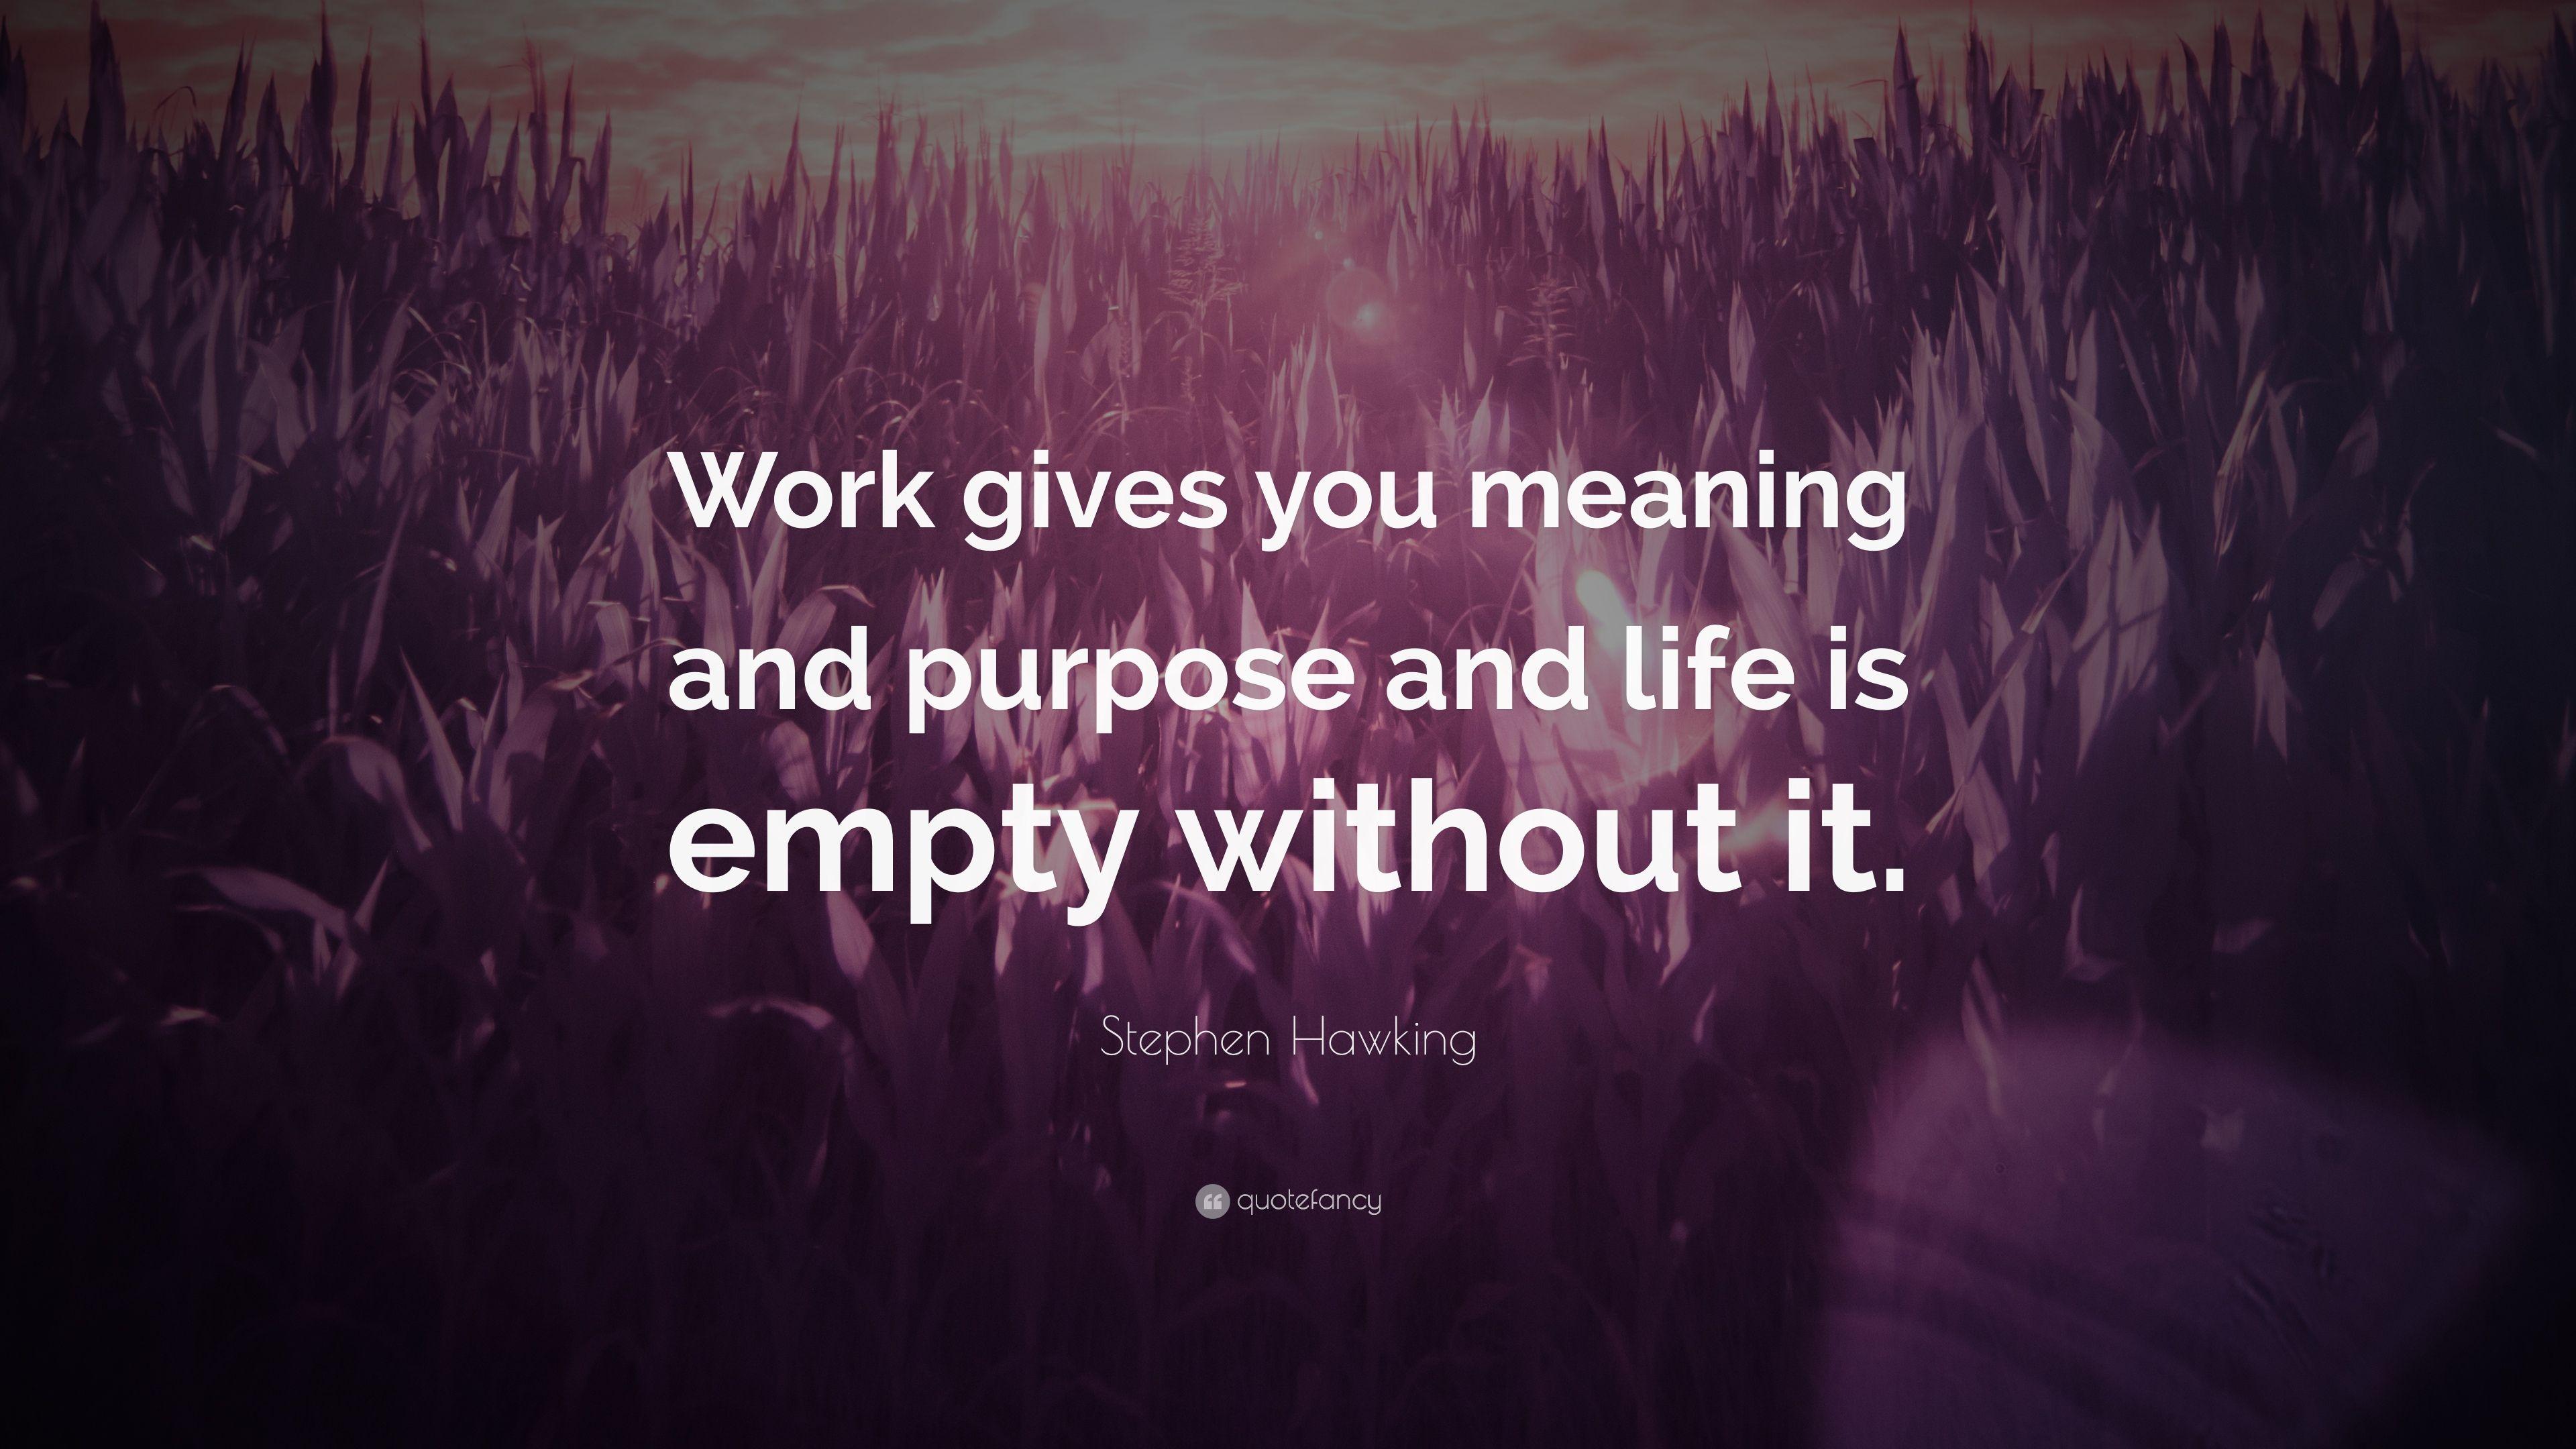 Stephen Hawking Quote: “Work gives you meaning and purpose